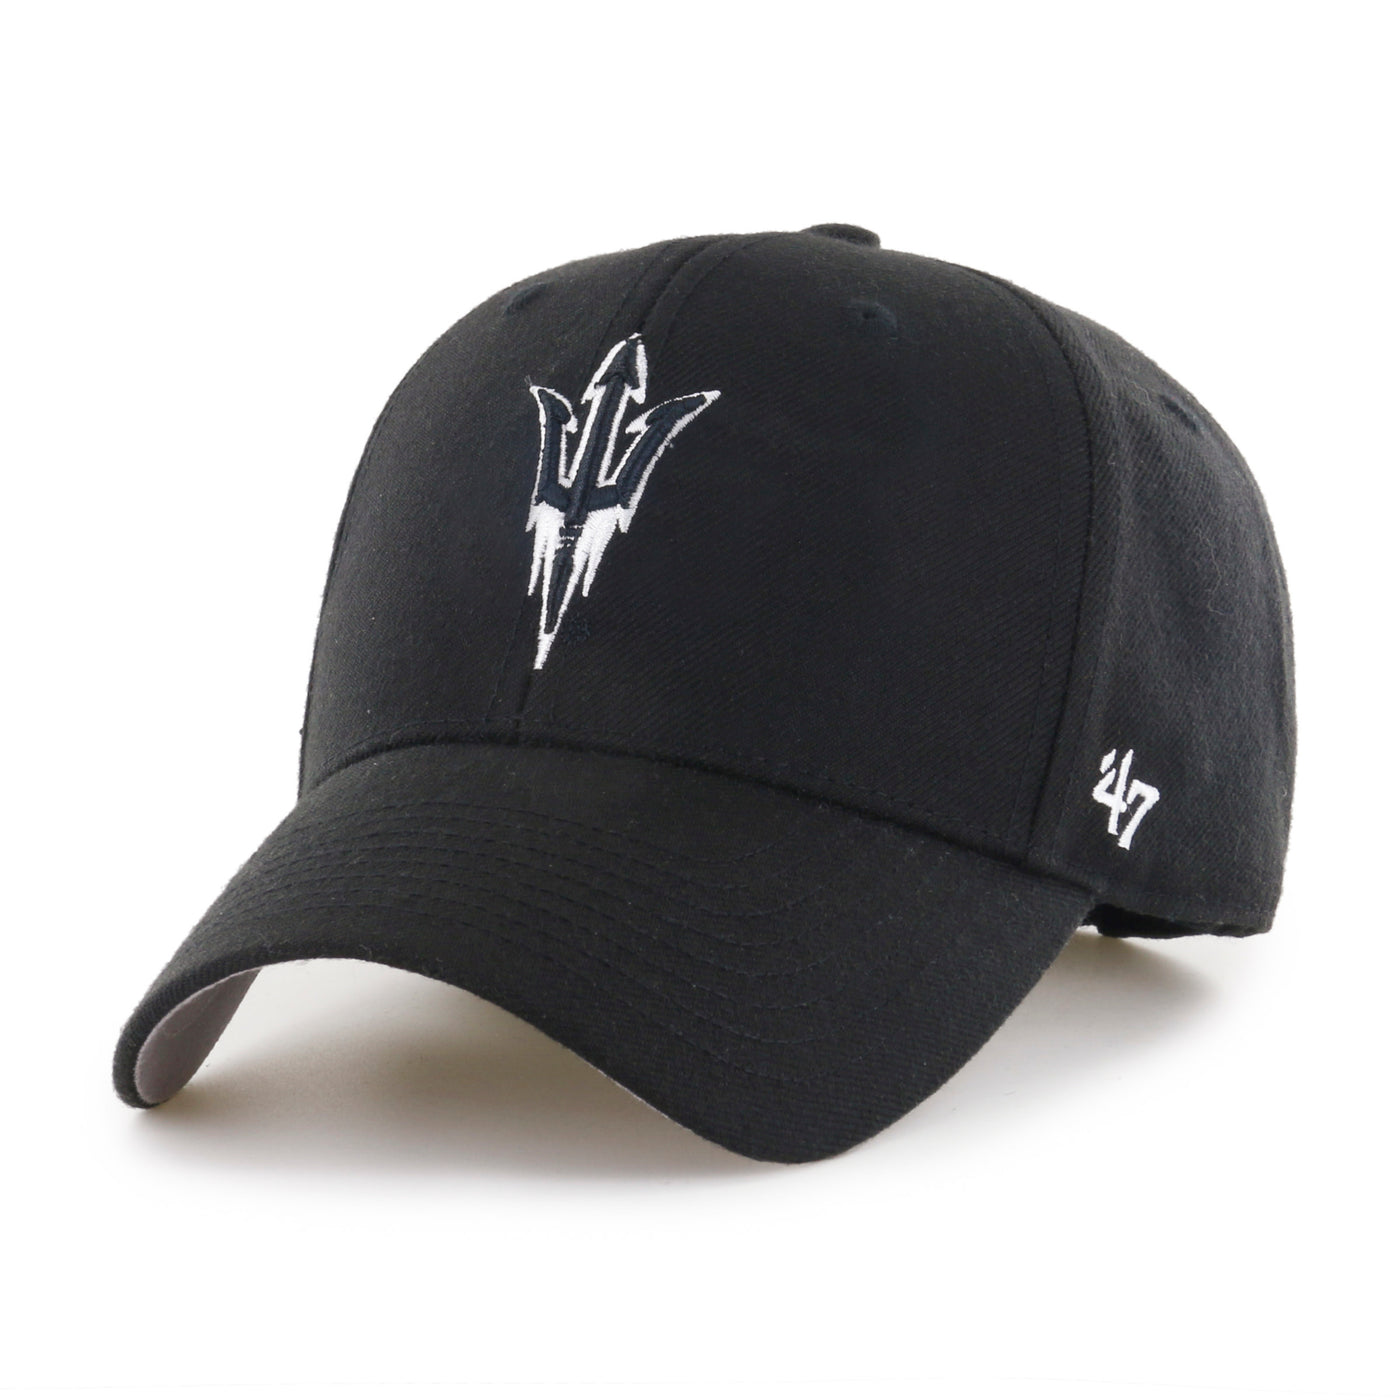 ASU black hat with a white outlined pitchfork on the front by 47Brand